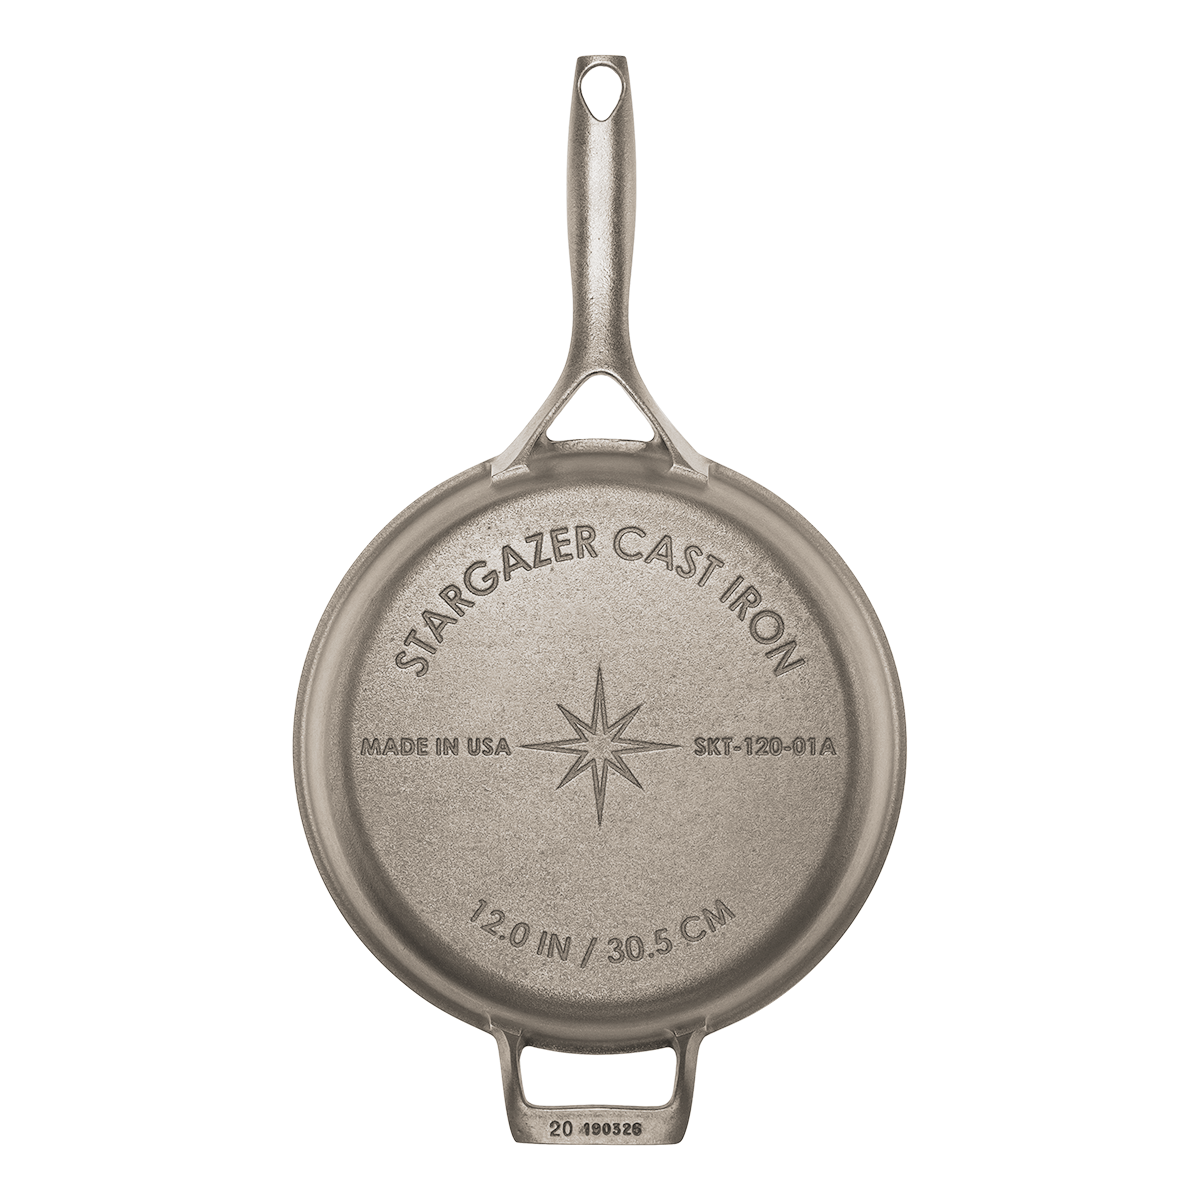 Lodge 10 Inch Cast Iron Skillet Made In the USA